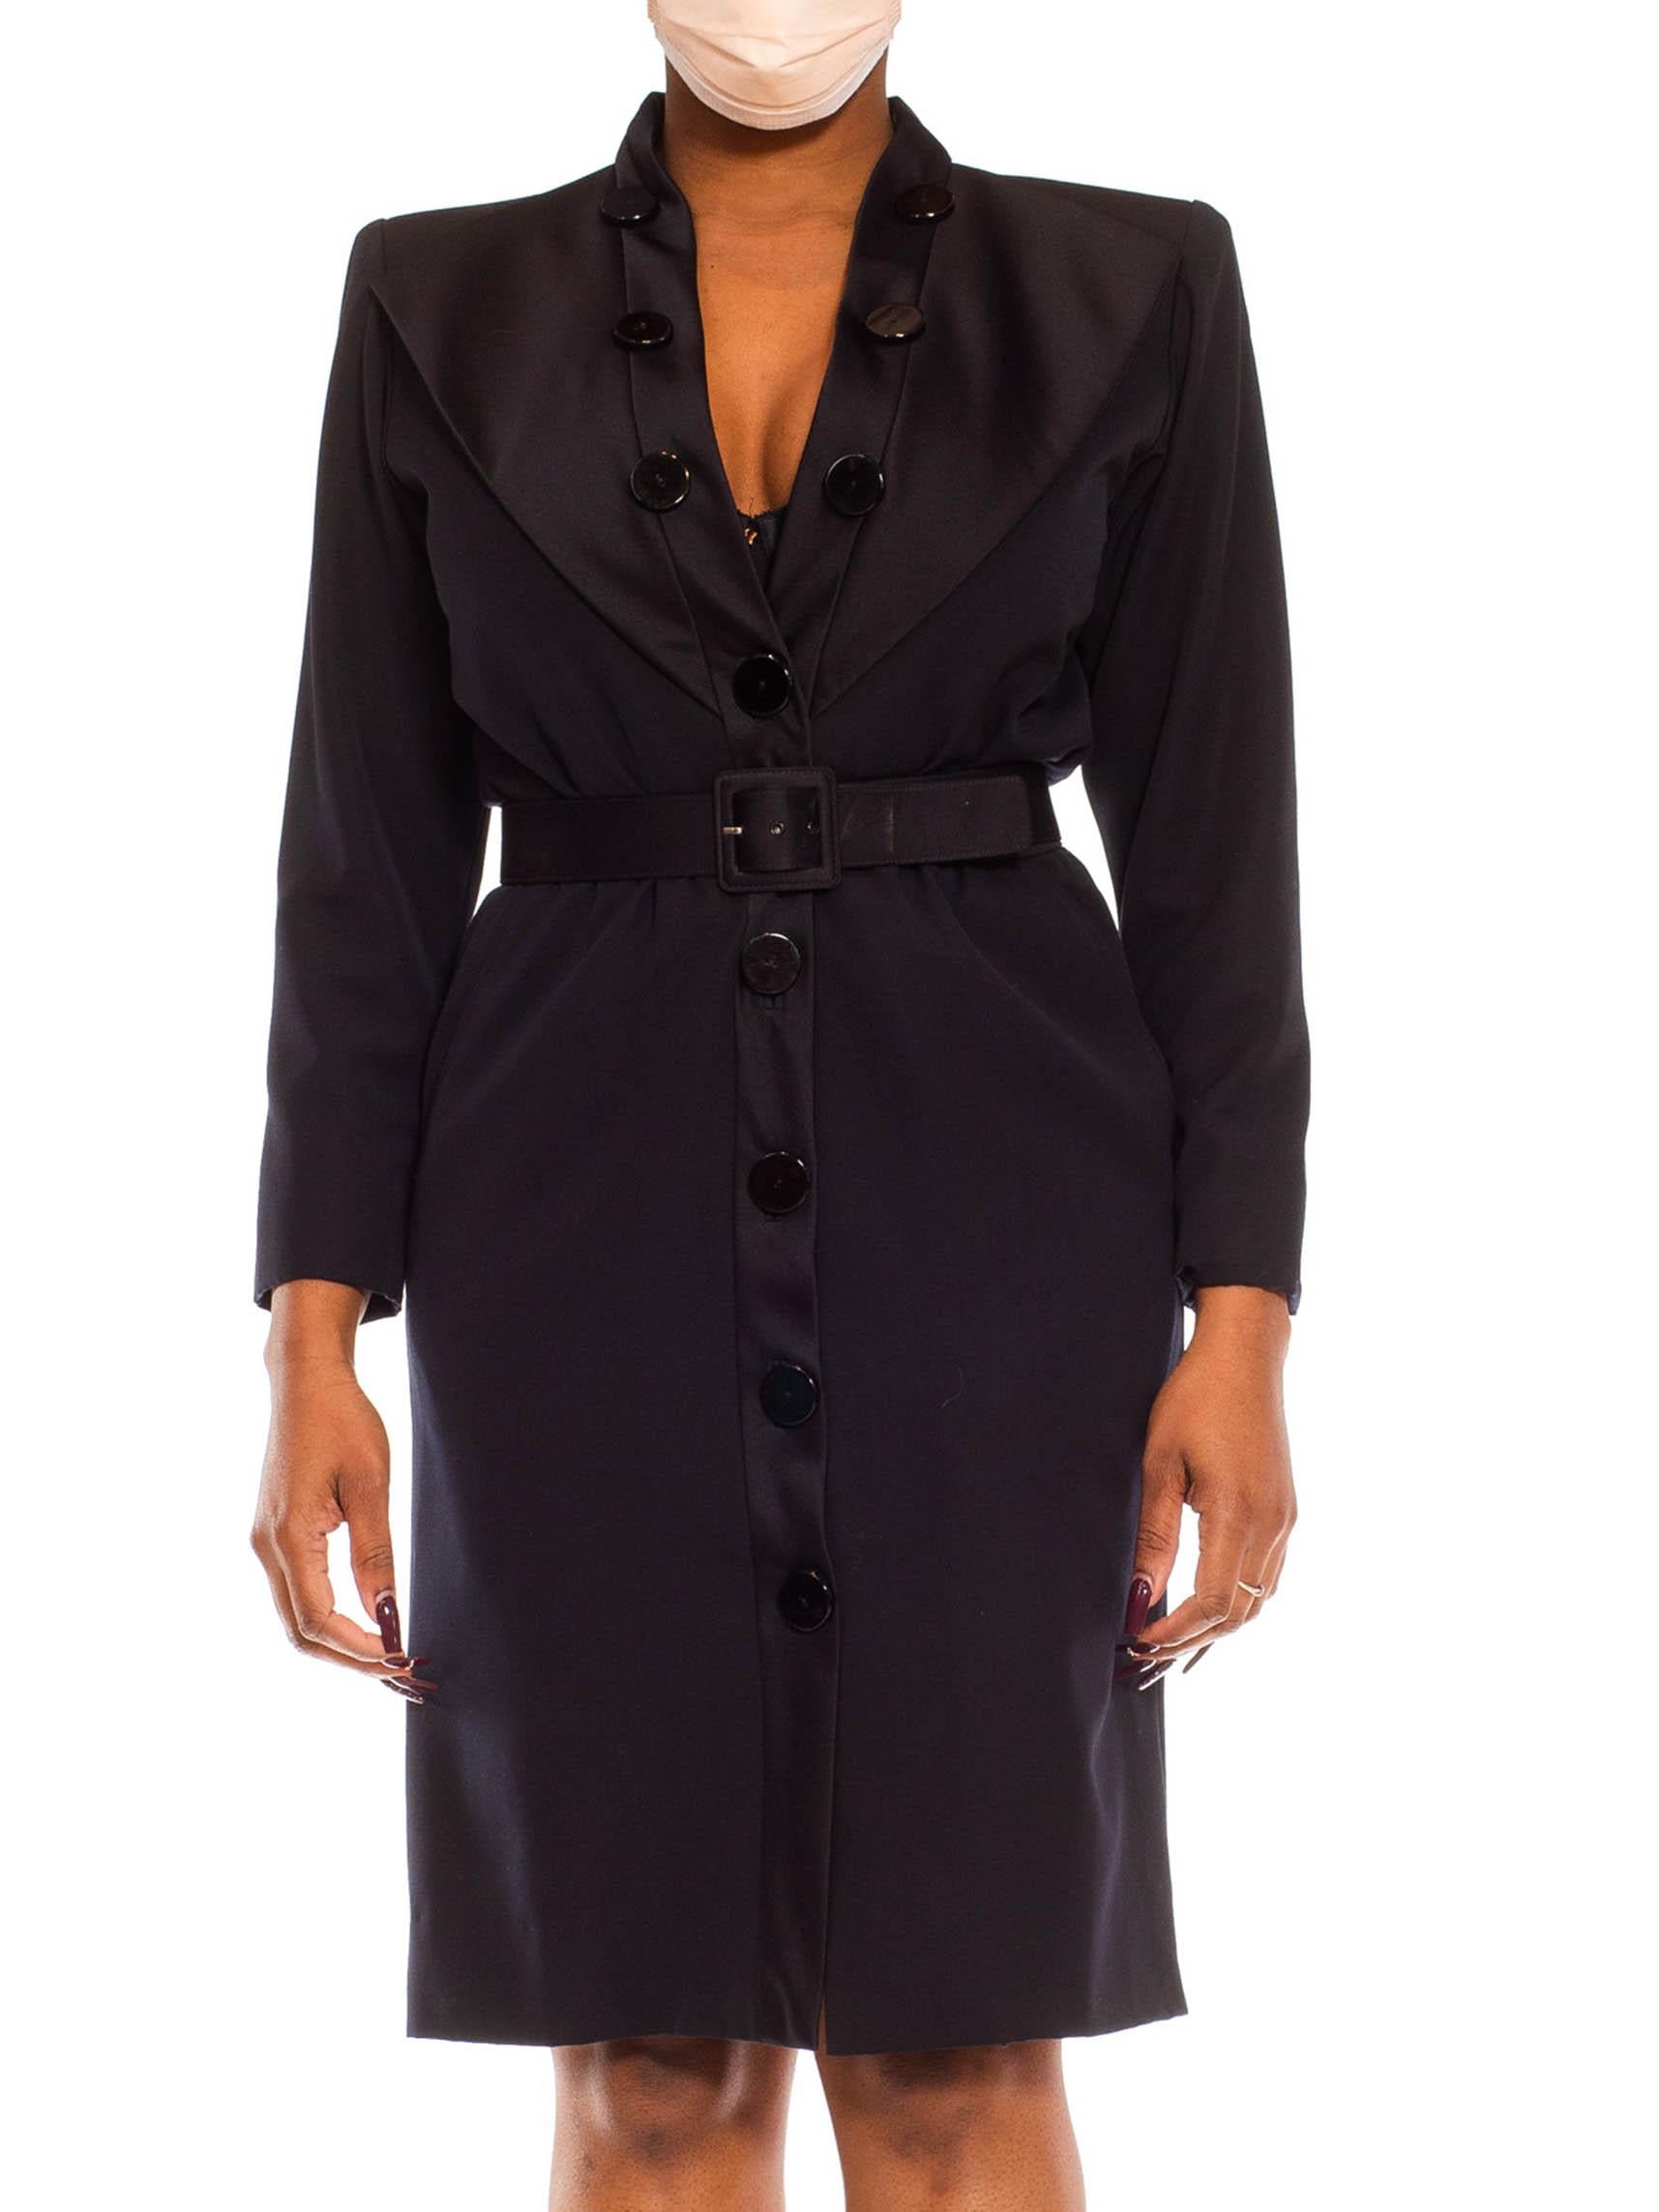 Women's 1980S Yves Saint Laurent Black Wool Belted Shirt Dress With Satin Tuxedo Style  For Sale